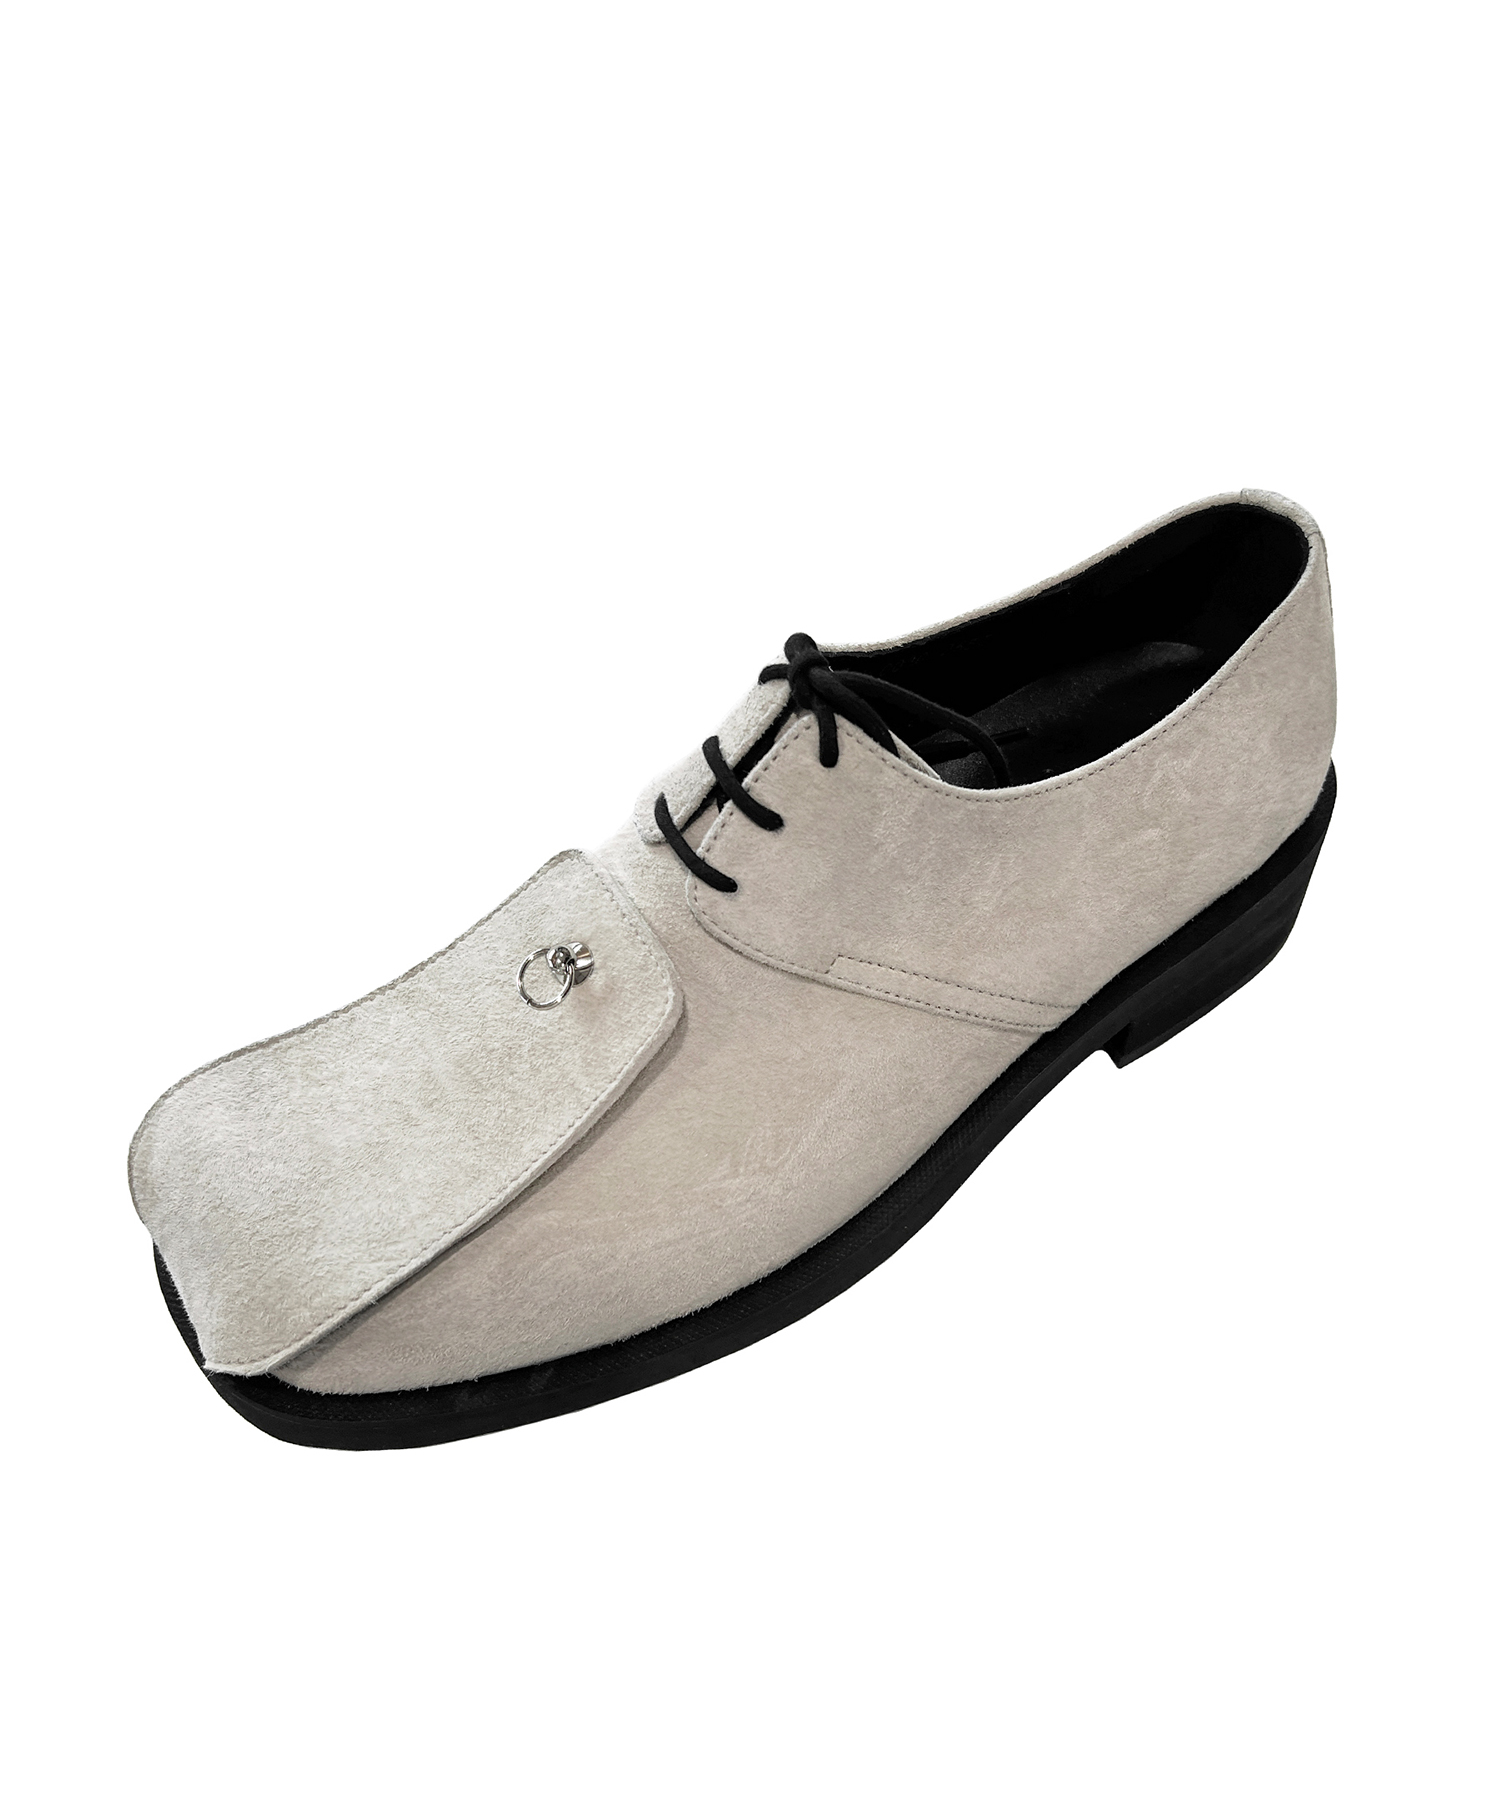 LMMM TOE COVER 3HOLE DERBY IVORY SUEDE